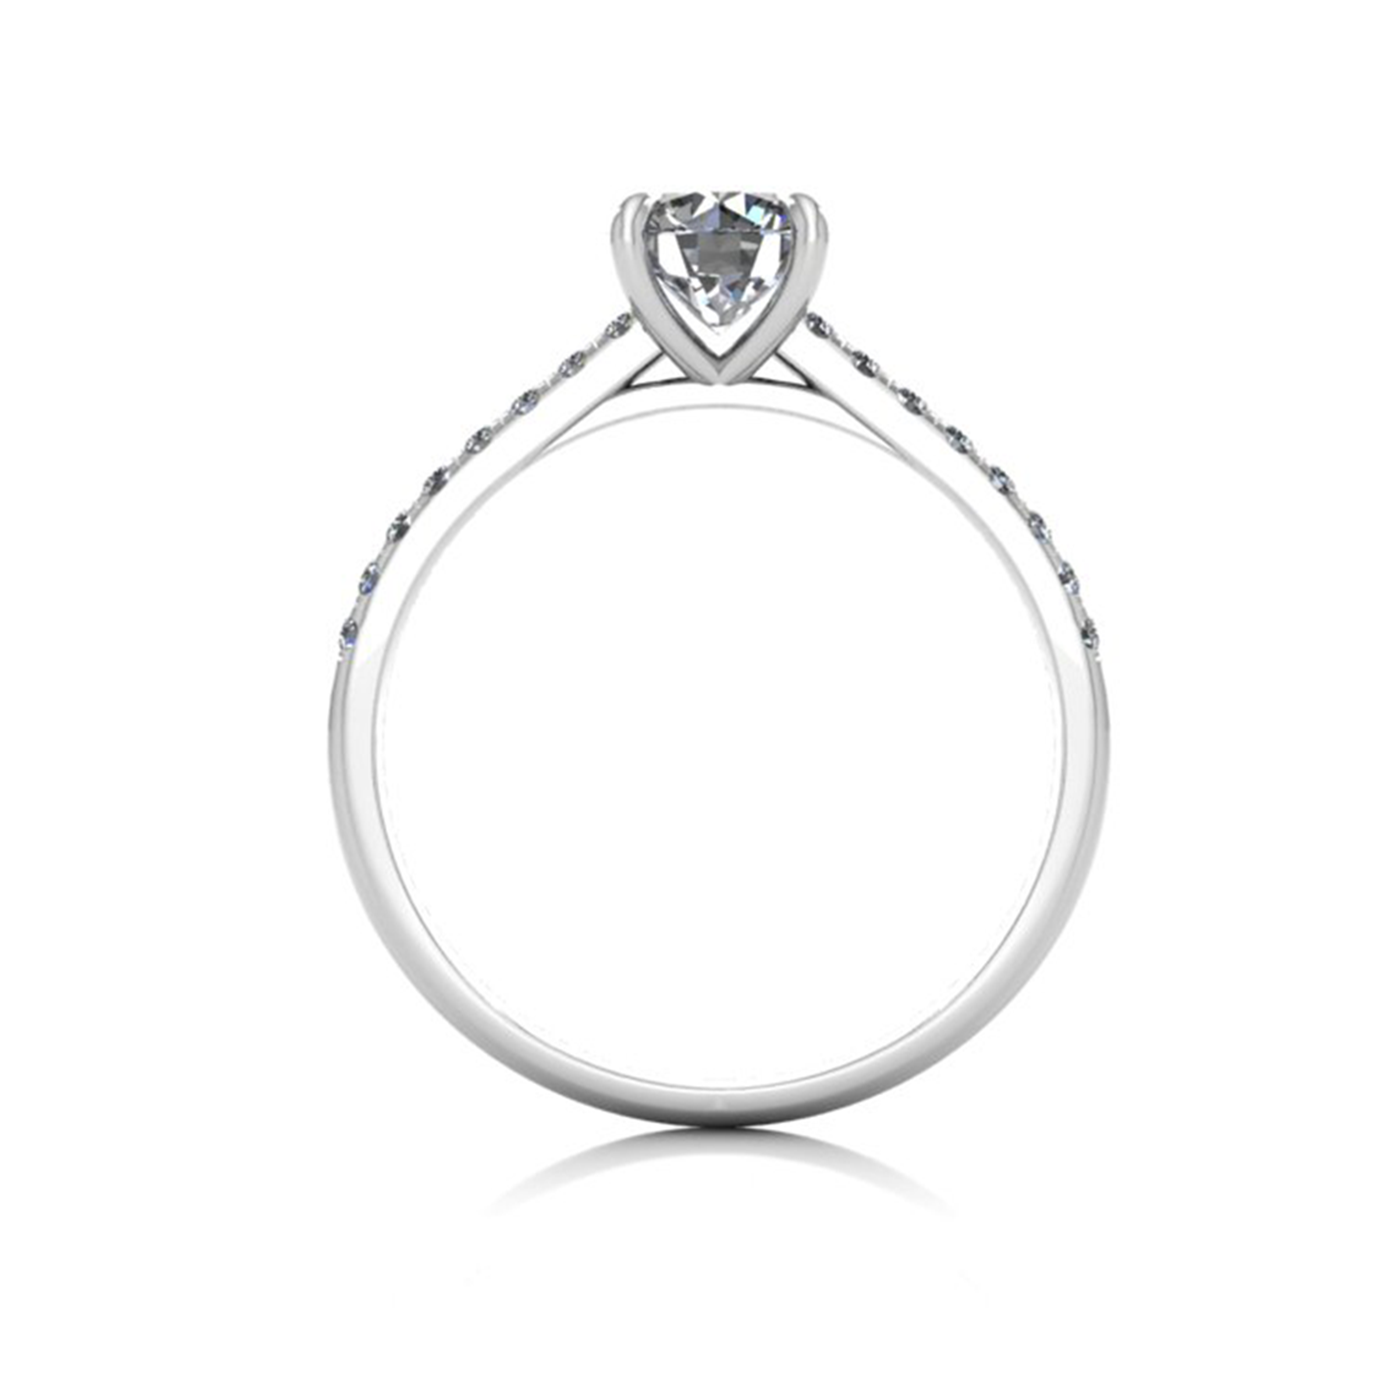 18k white gold 0,80 ct 4 prongs round cut diamond engagement ring with whisper thin pavÉ set band